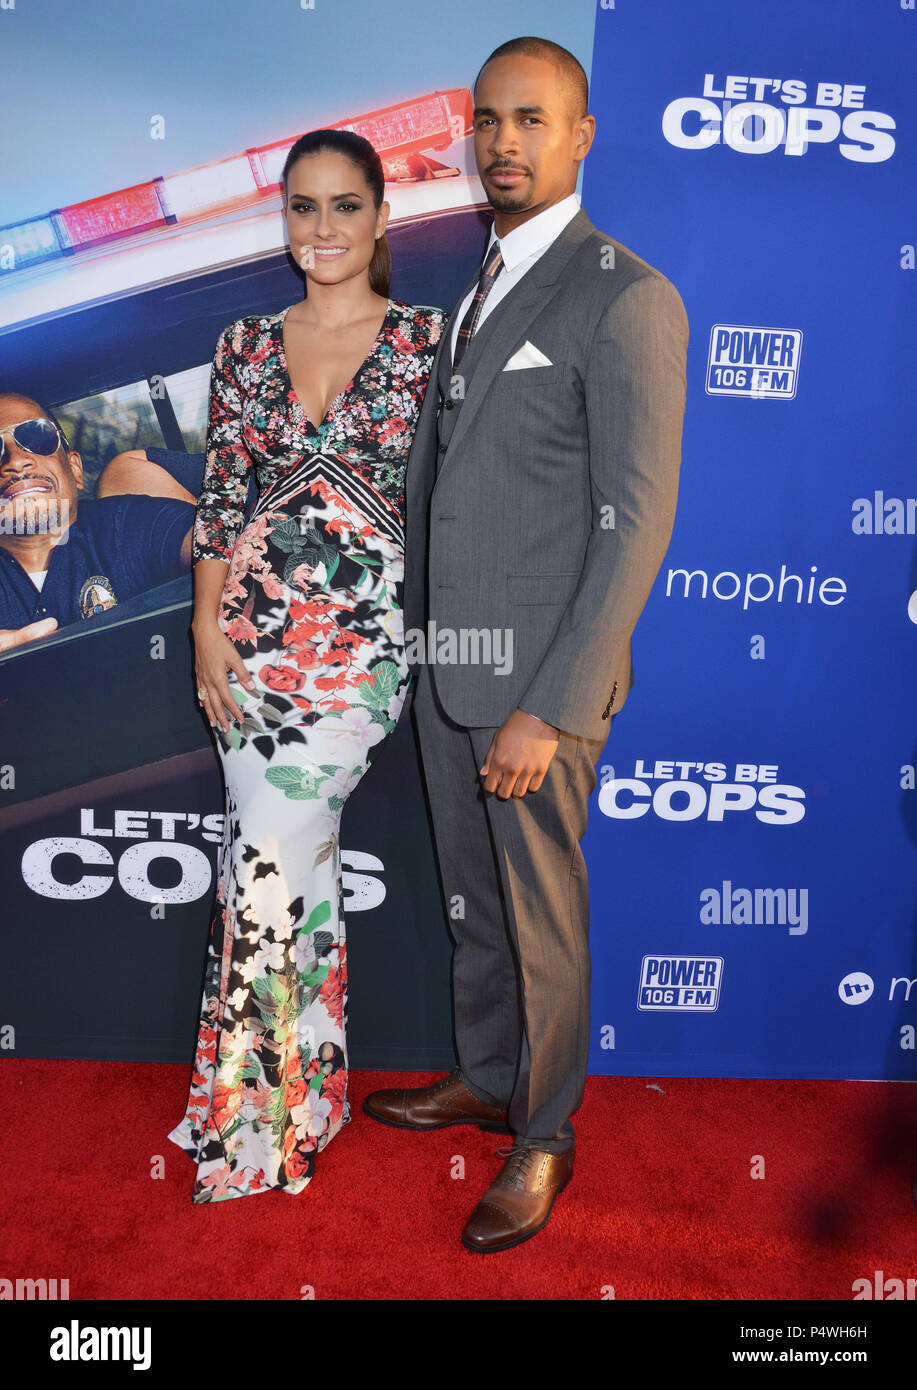 Damon Wayans Jr. and wife Samara Saraiva  at the Let s Be Cops premiere at the Arclight Theatre in Los Angeles.Damon Wayans Jr. and wife Samara Saraiva 176 ------------- Red Carpet Event, Vertical, USA, Film Industry, Celebrities,  Photography, Bestof, Arts Culture and Entertainment, Topix Celebrities fashion /  Vertical, Best of, Event in Hollywood Life - California,  Red Carpet and backstage, USA, Film Industry, Celebrities,  movie celebrities, TV celebrities, Music celebrities, Photography, Bestof, Arts Culture and Entertainment,  Topix, vertical,  family from from the year , 2014, inquiry  Stock Photo